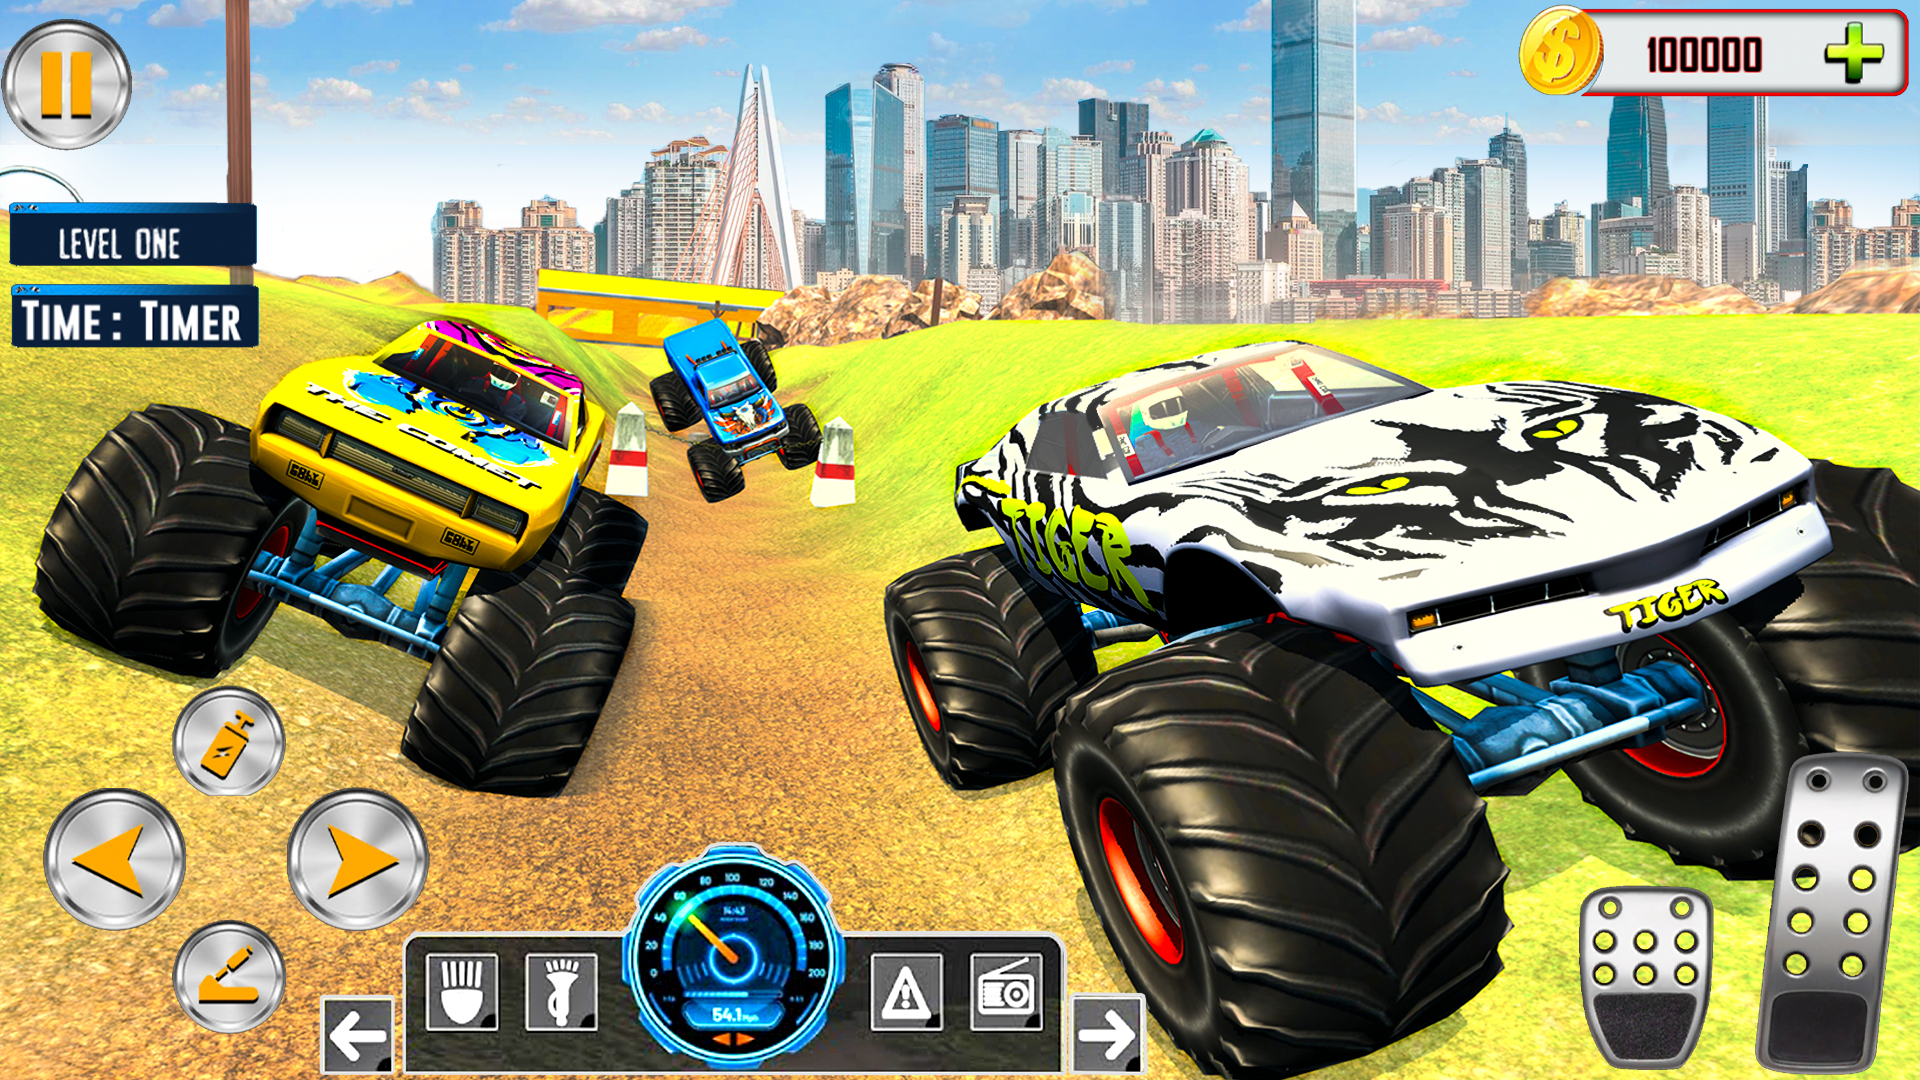 Offroad Race Timer